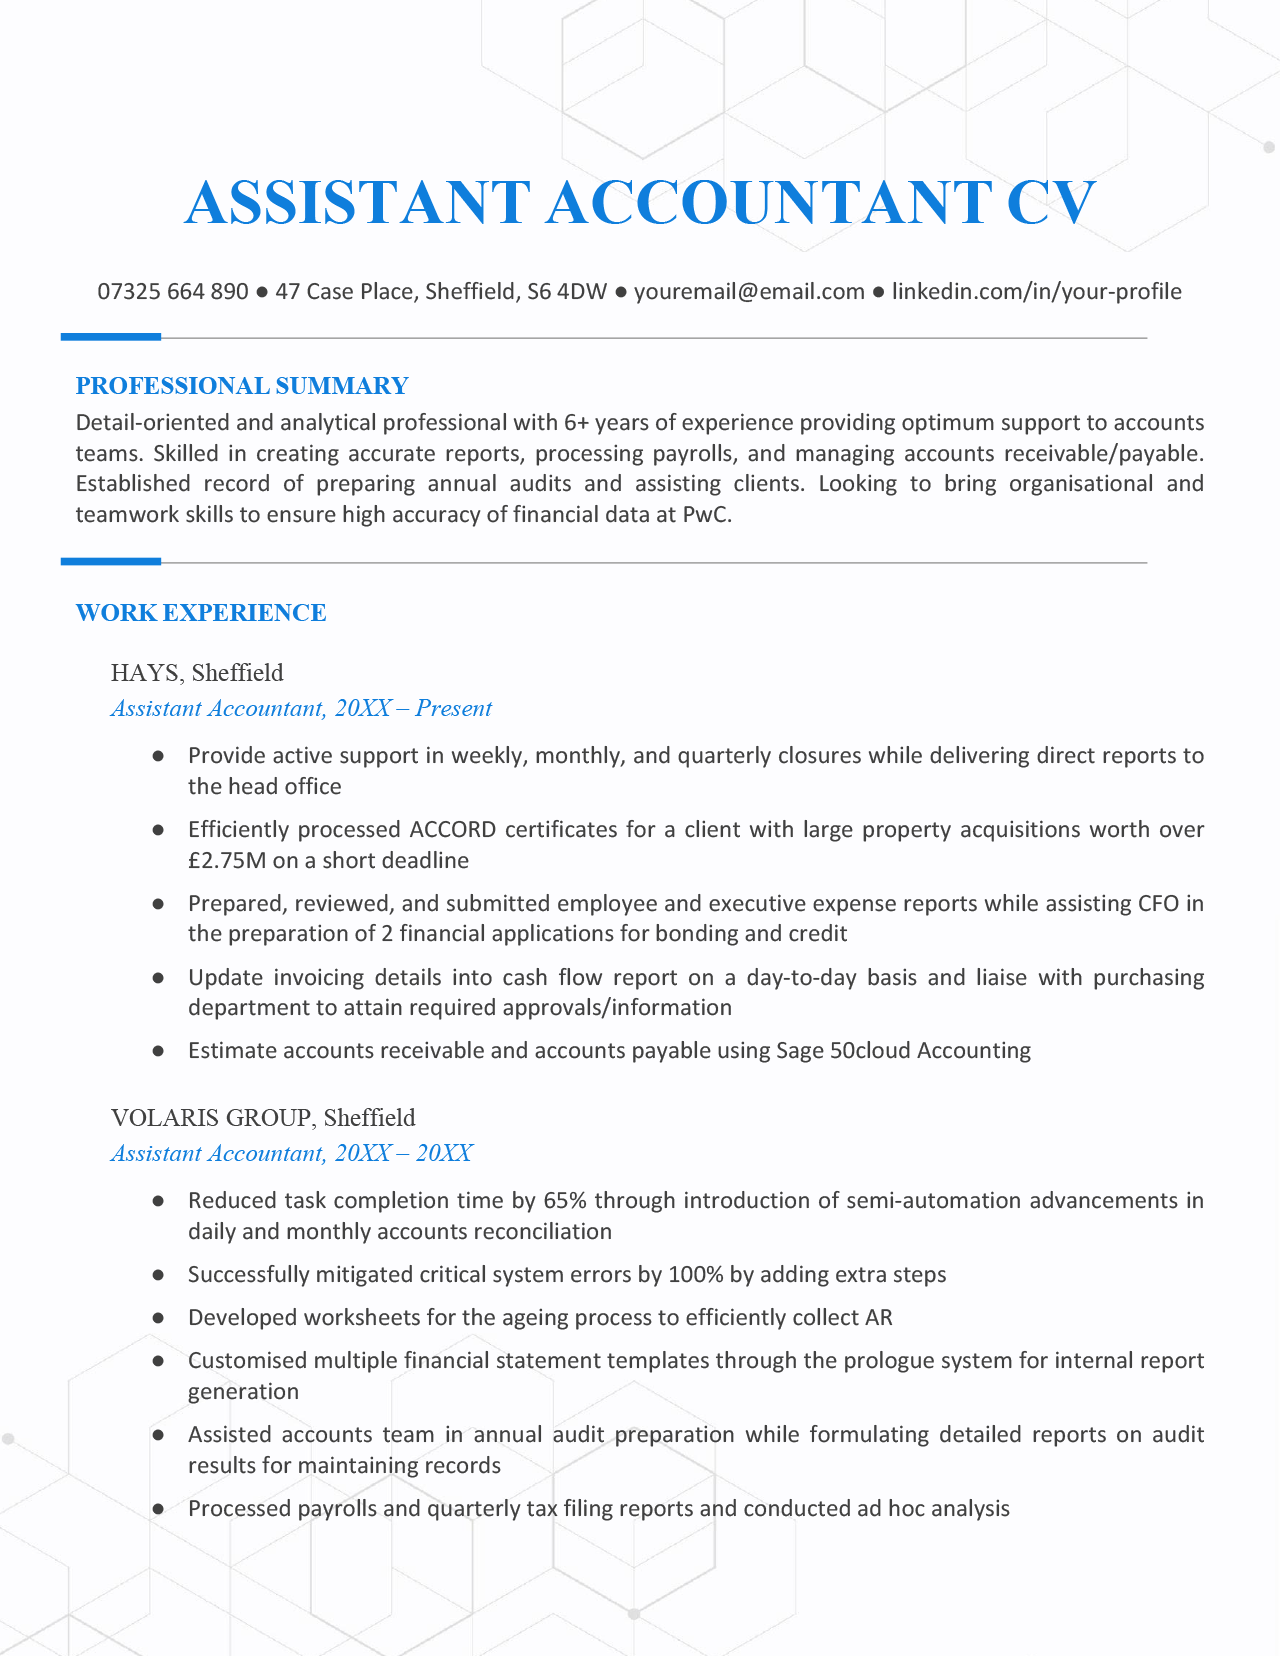 The first page of a blue-themed assistant accountant CV example with the applicant's contact information, professional summary, and work experience.